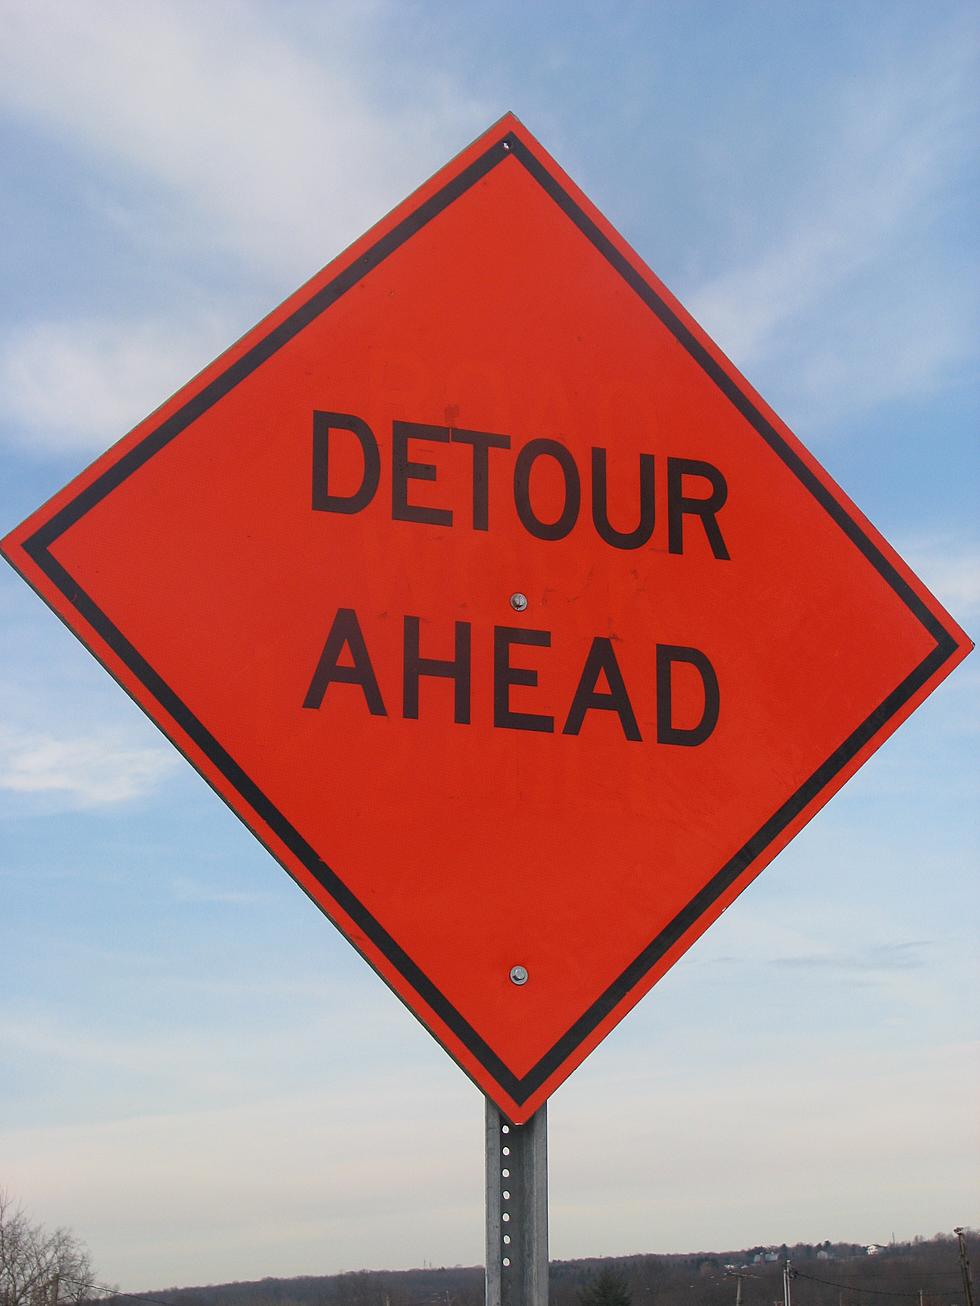 New York State DOT Officials Say Stop Ignoring State Route 28 Detour